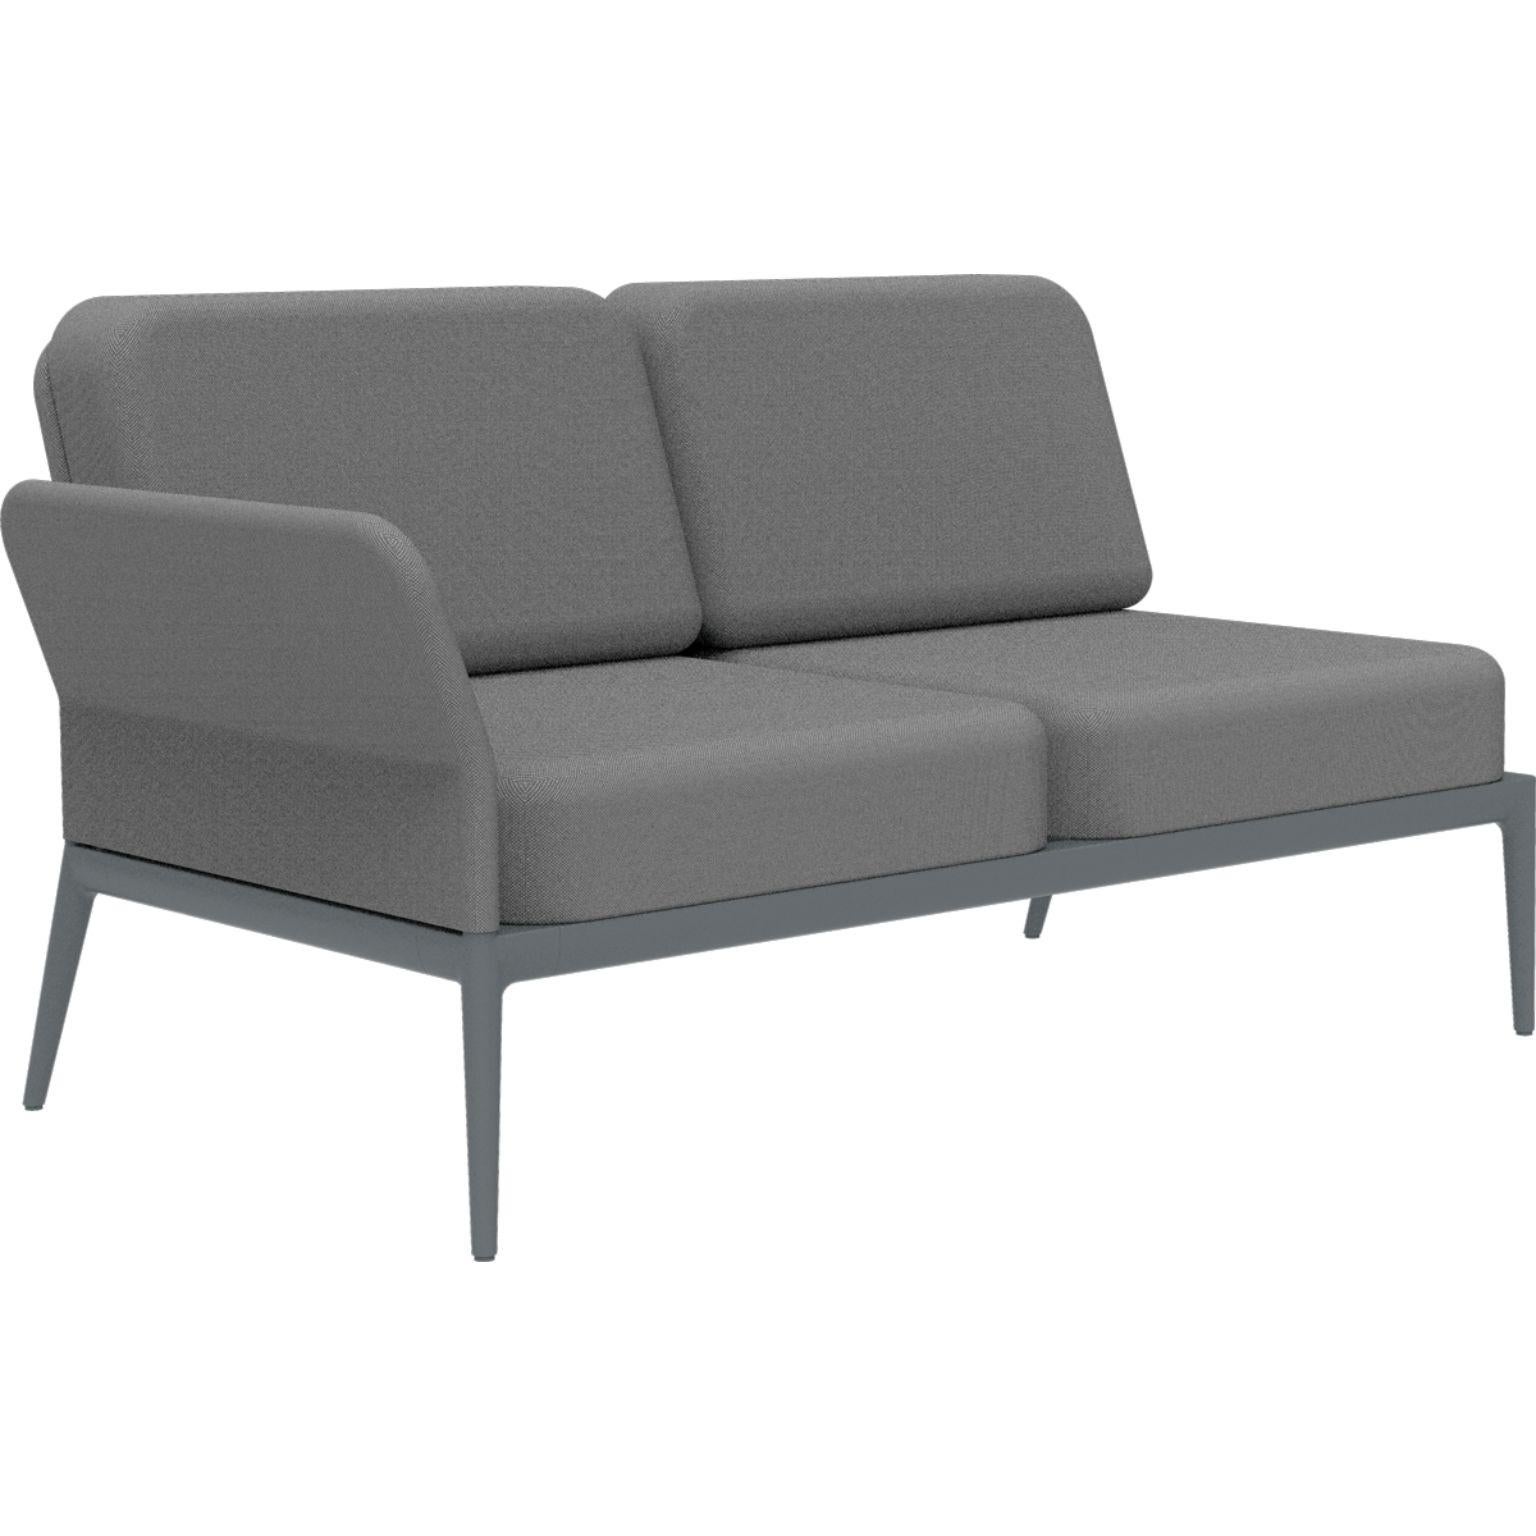 Cover Grey Double Right Modular Sofa by MOWEE
Dimensions: D83 x W148 x H81 cm (seat height 42 cm).
Material: Aluminum and upholstery.
Weight: 29 kg.
Also available in different colors and finishes. 

An unmistakable collection for its beauty